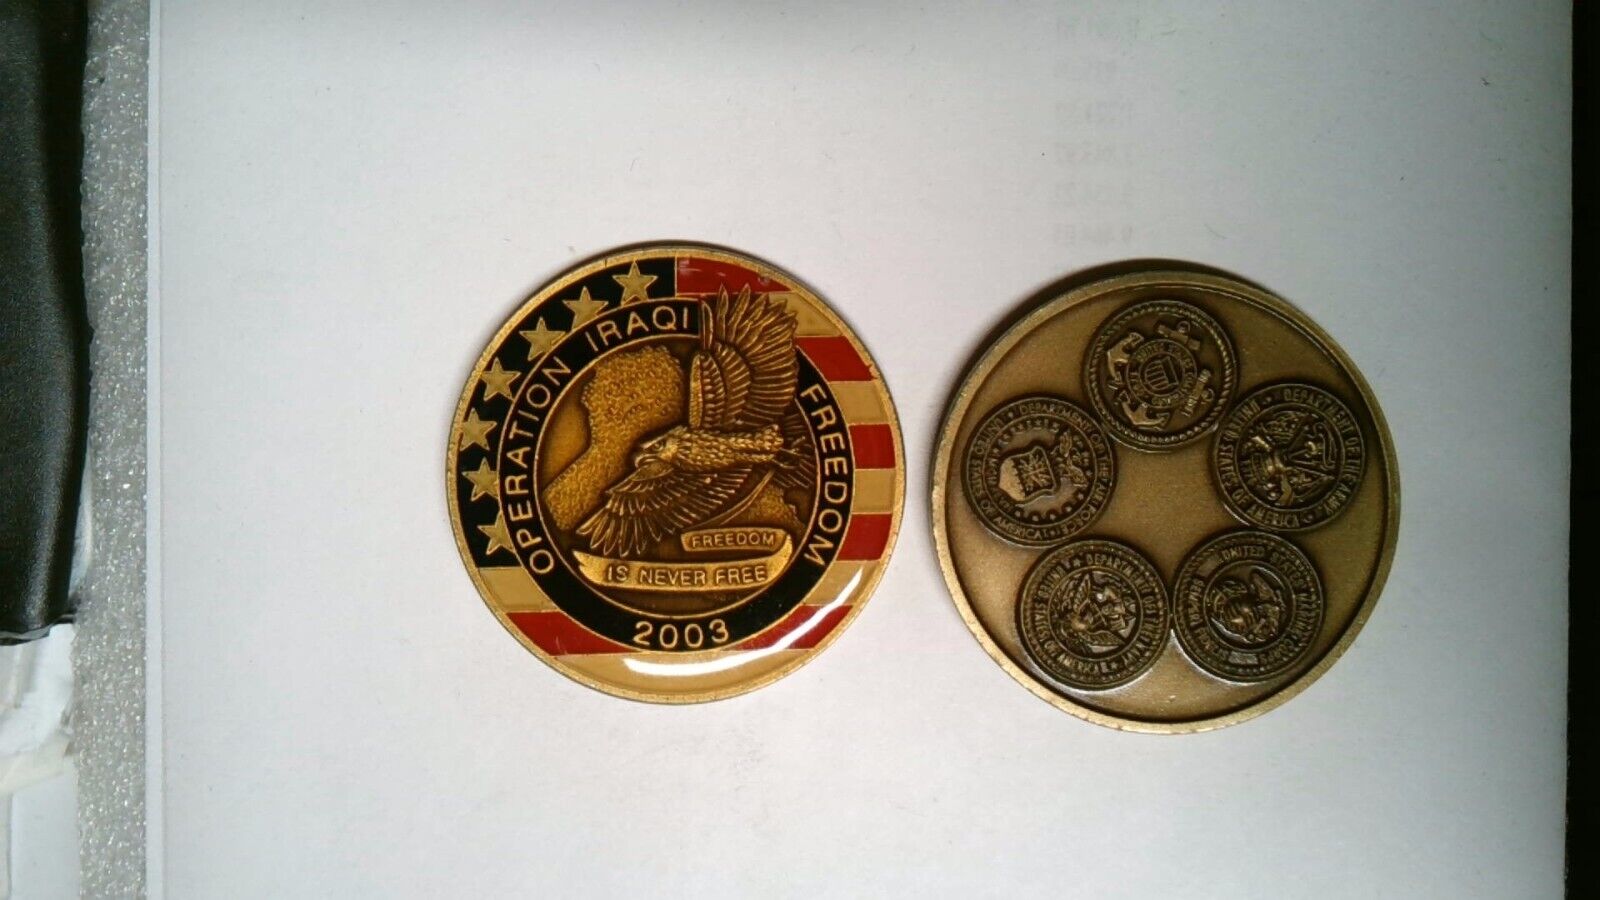 CHALLENGE COIN OPERATION IRAQI FREEDOM 2003 FREEDOM ISNT FREE ALL MILITARY FORCE